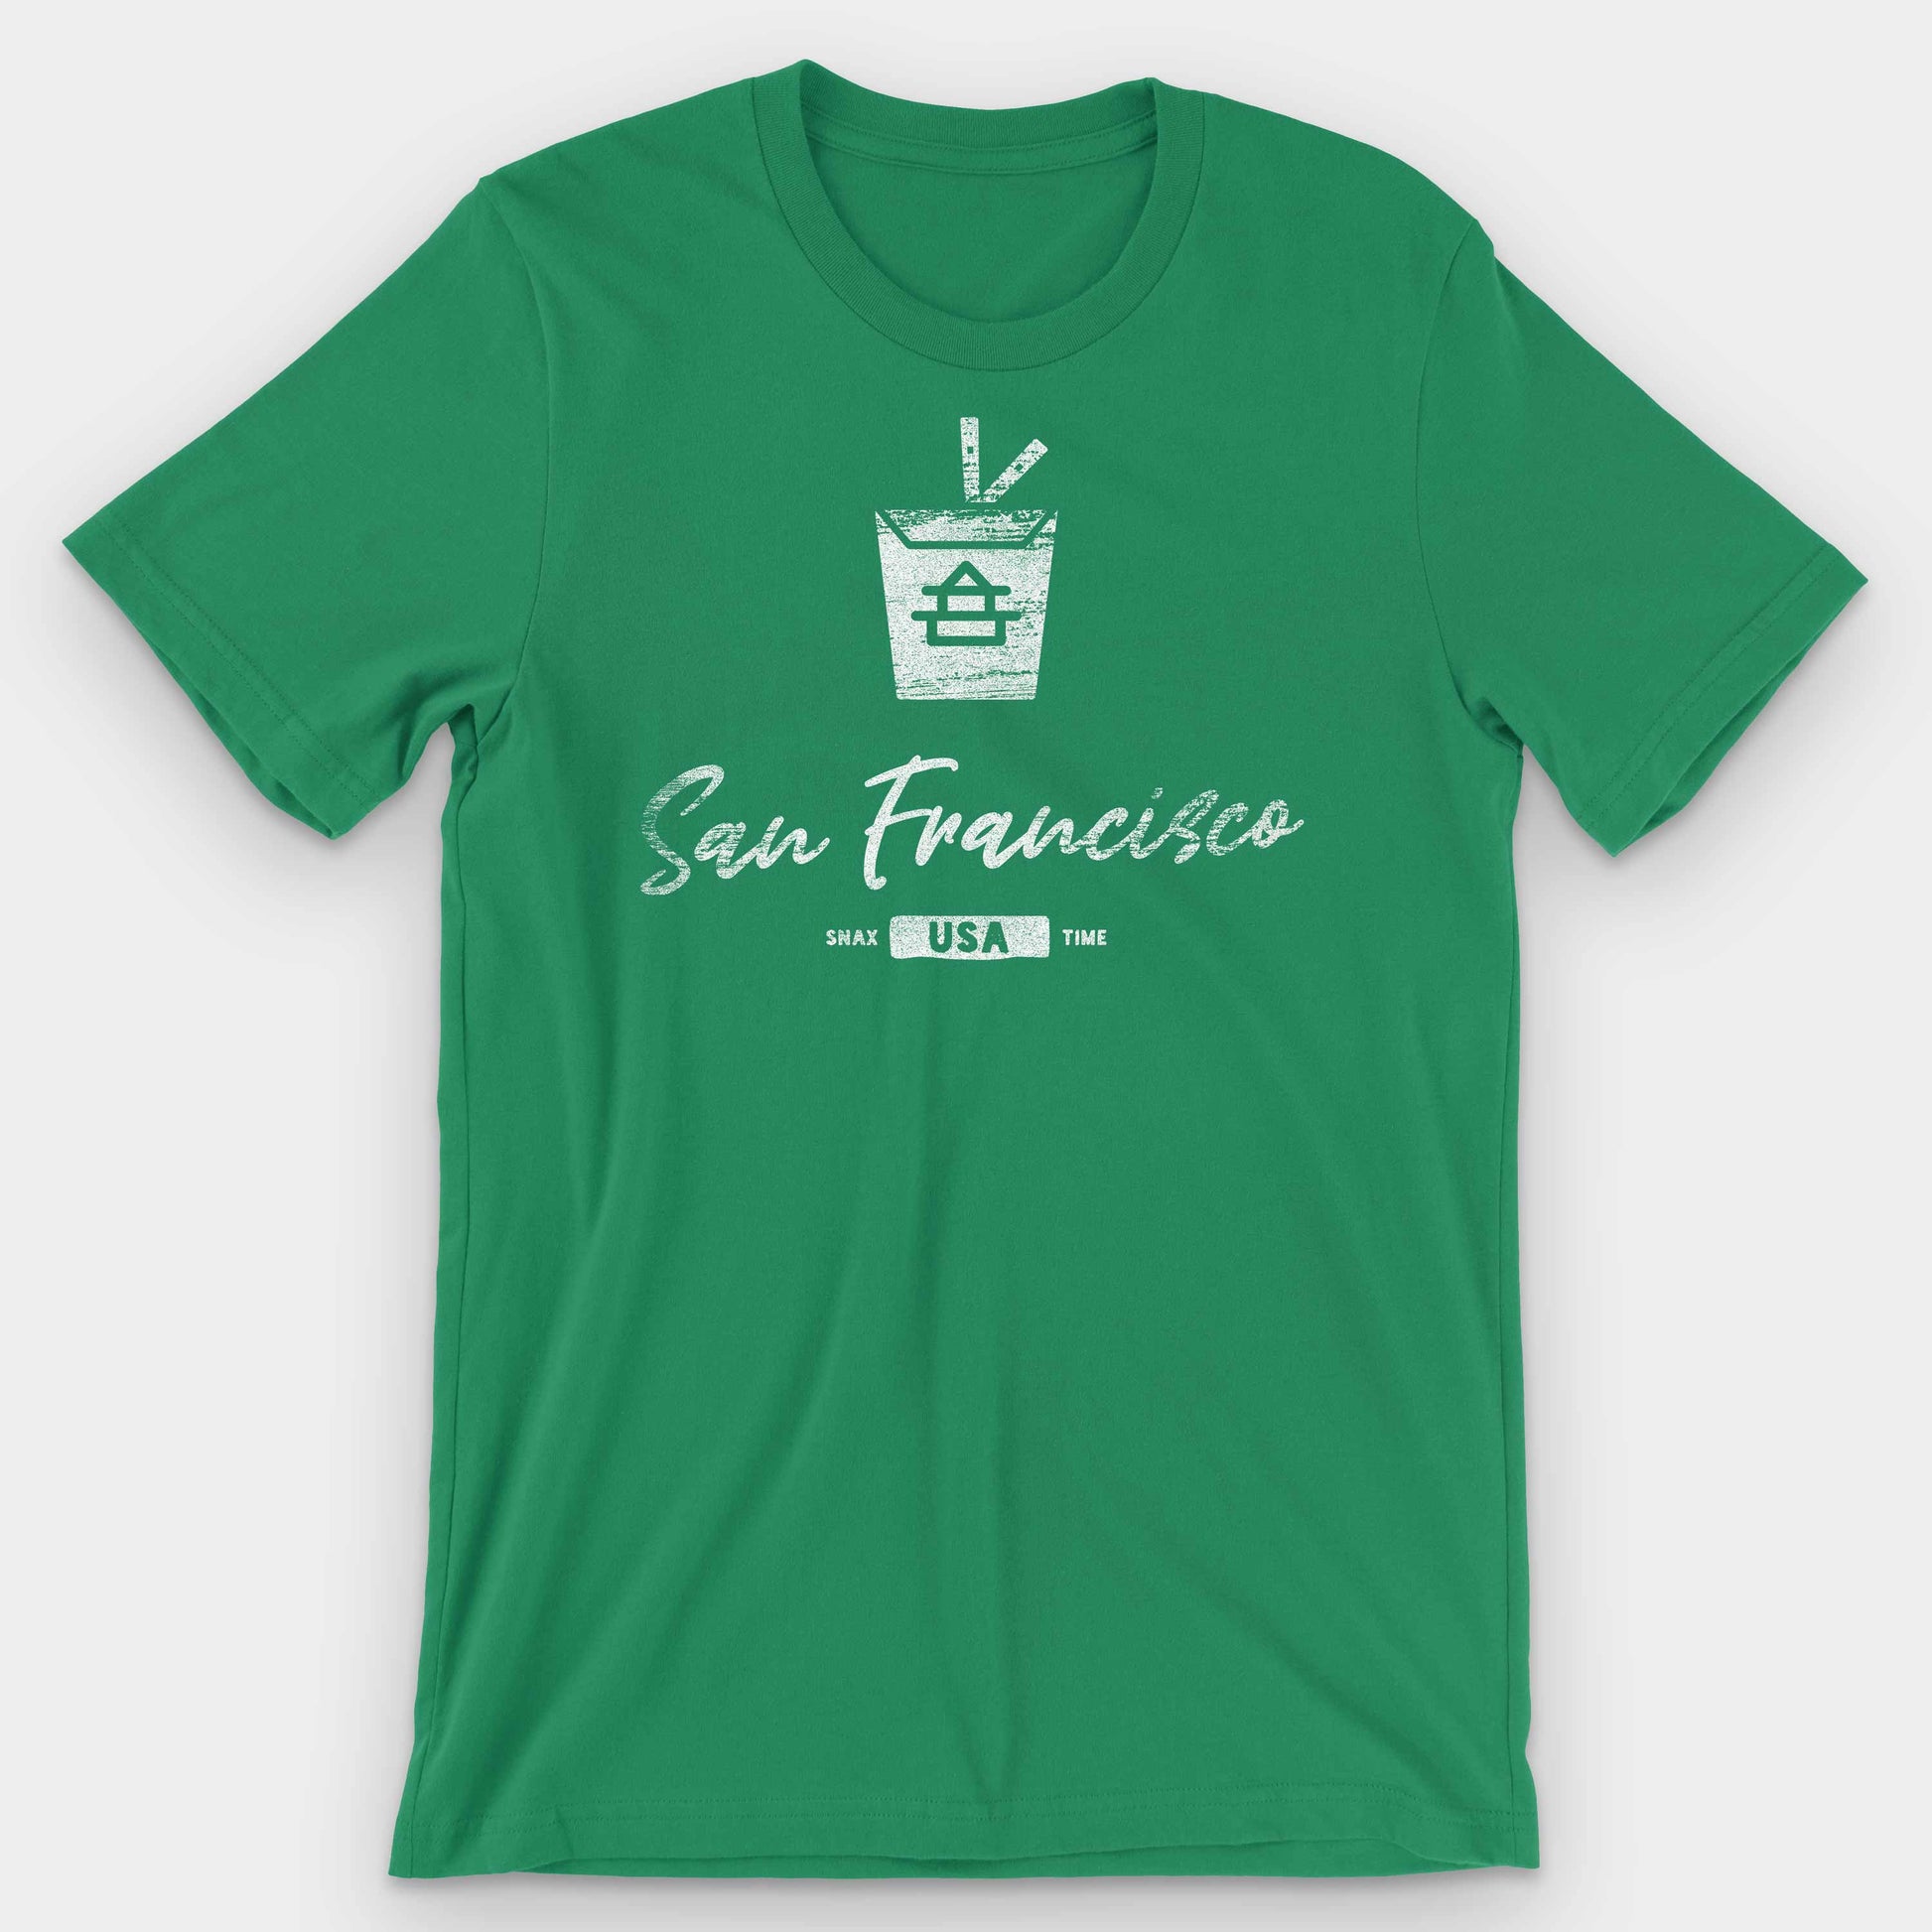 Kelly San Francisco Chinese Takeout Graphic T-Shirt by Snaxtime